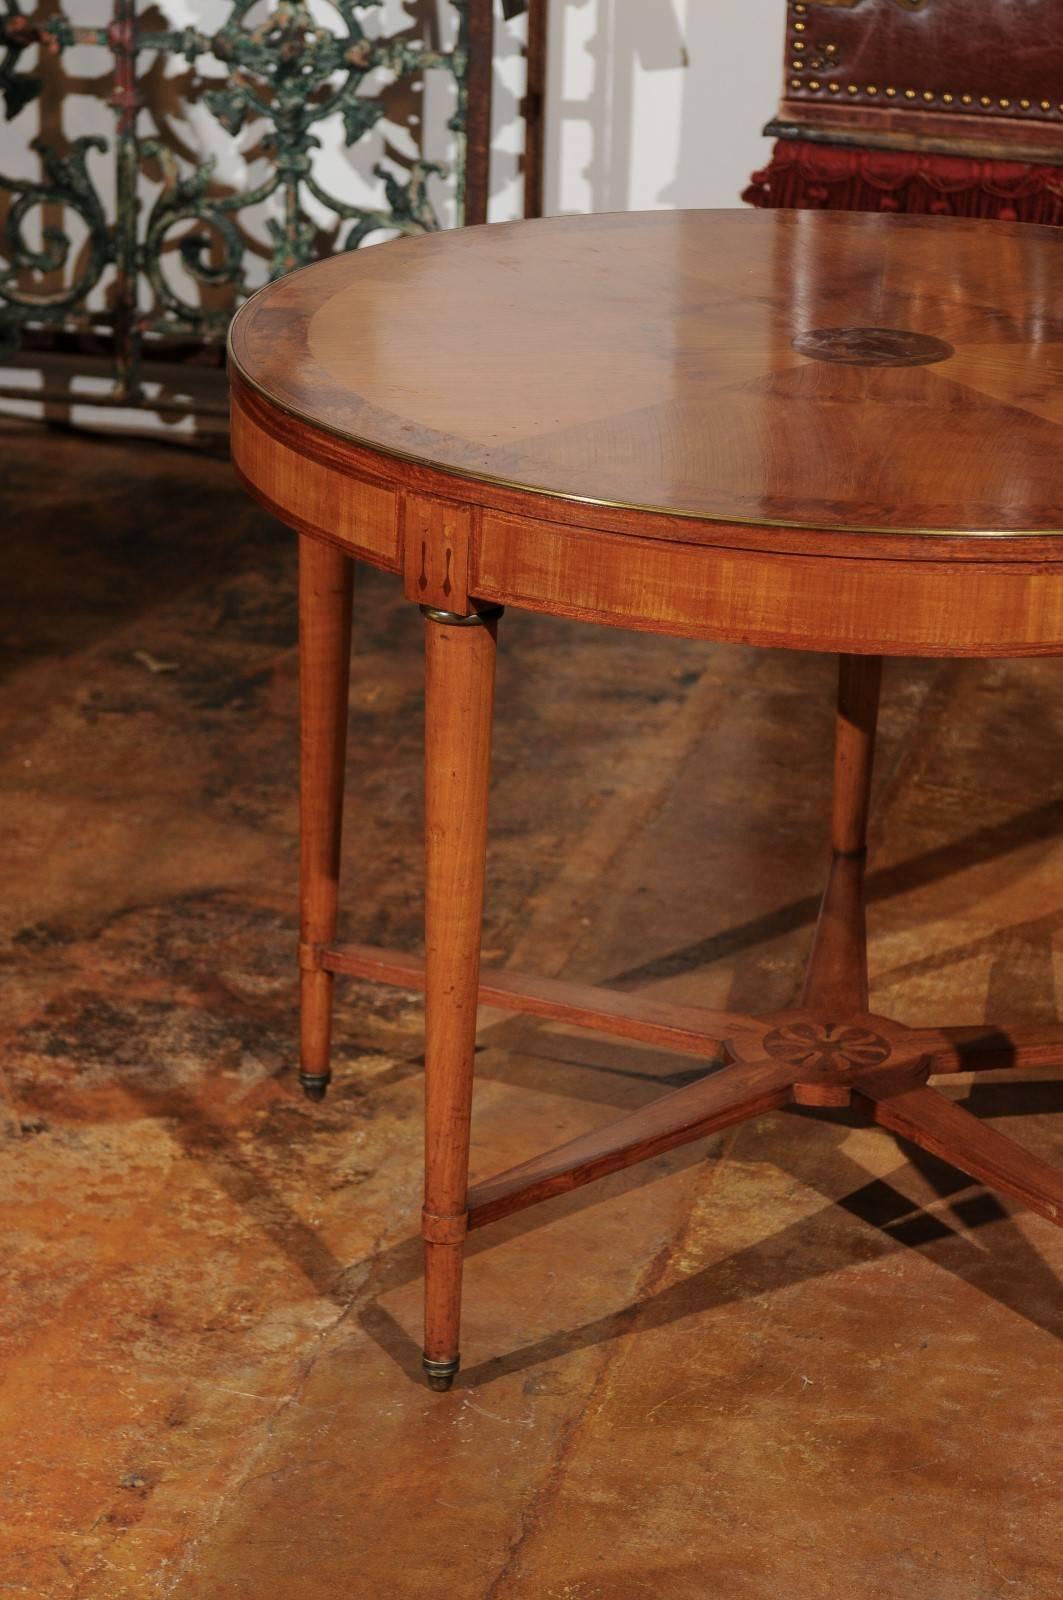 Inlay French 1880s Round Burl Walnut Inlaid Table with Star-Shaped Cross Stretcher